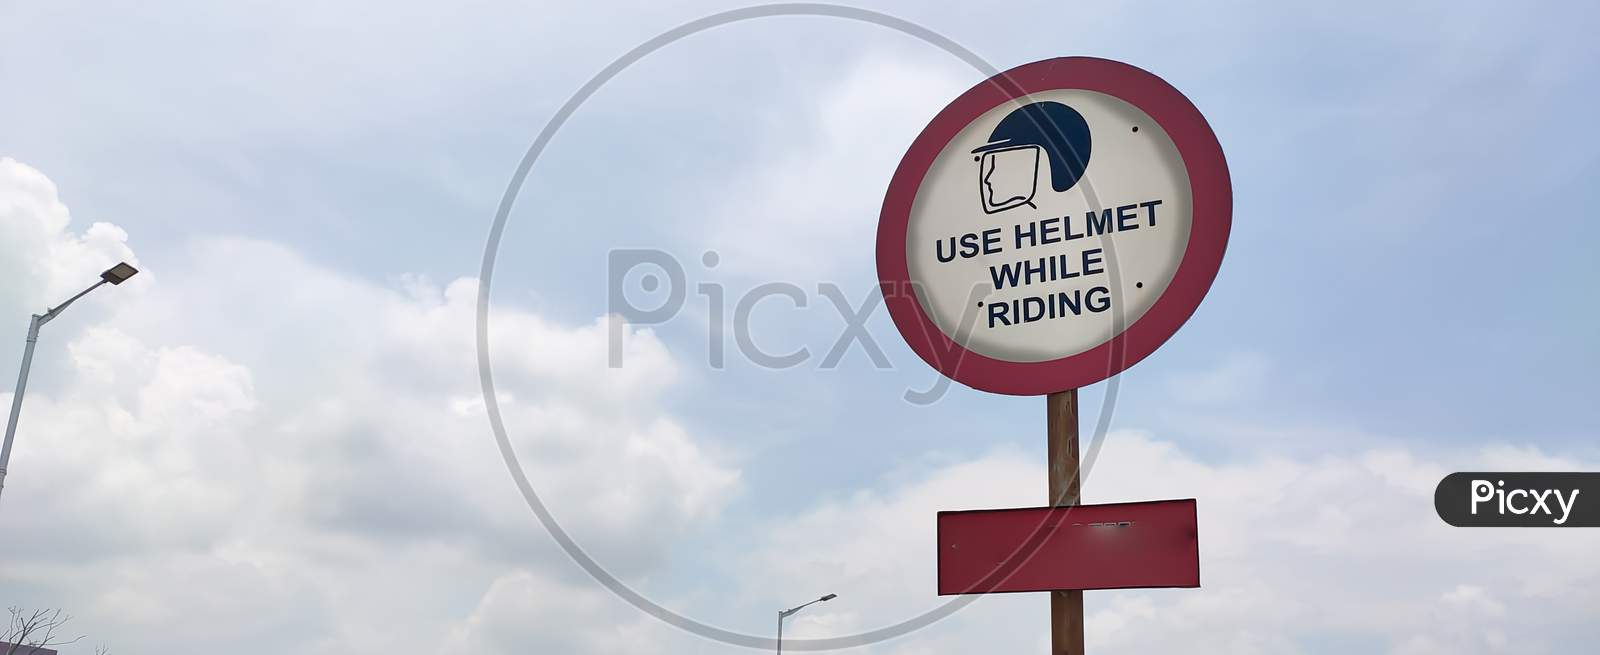 Traffic Rules And Signs Board On Road For Use Helmet While Riding For The Driver As Warning.